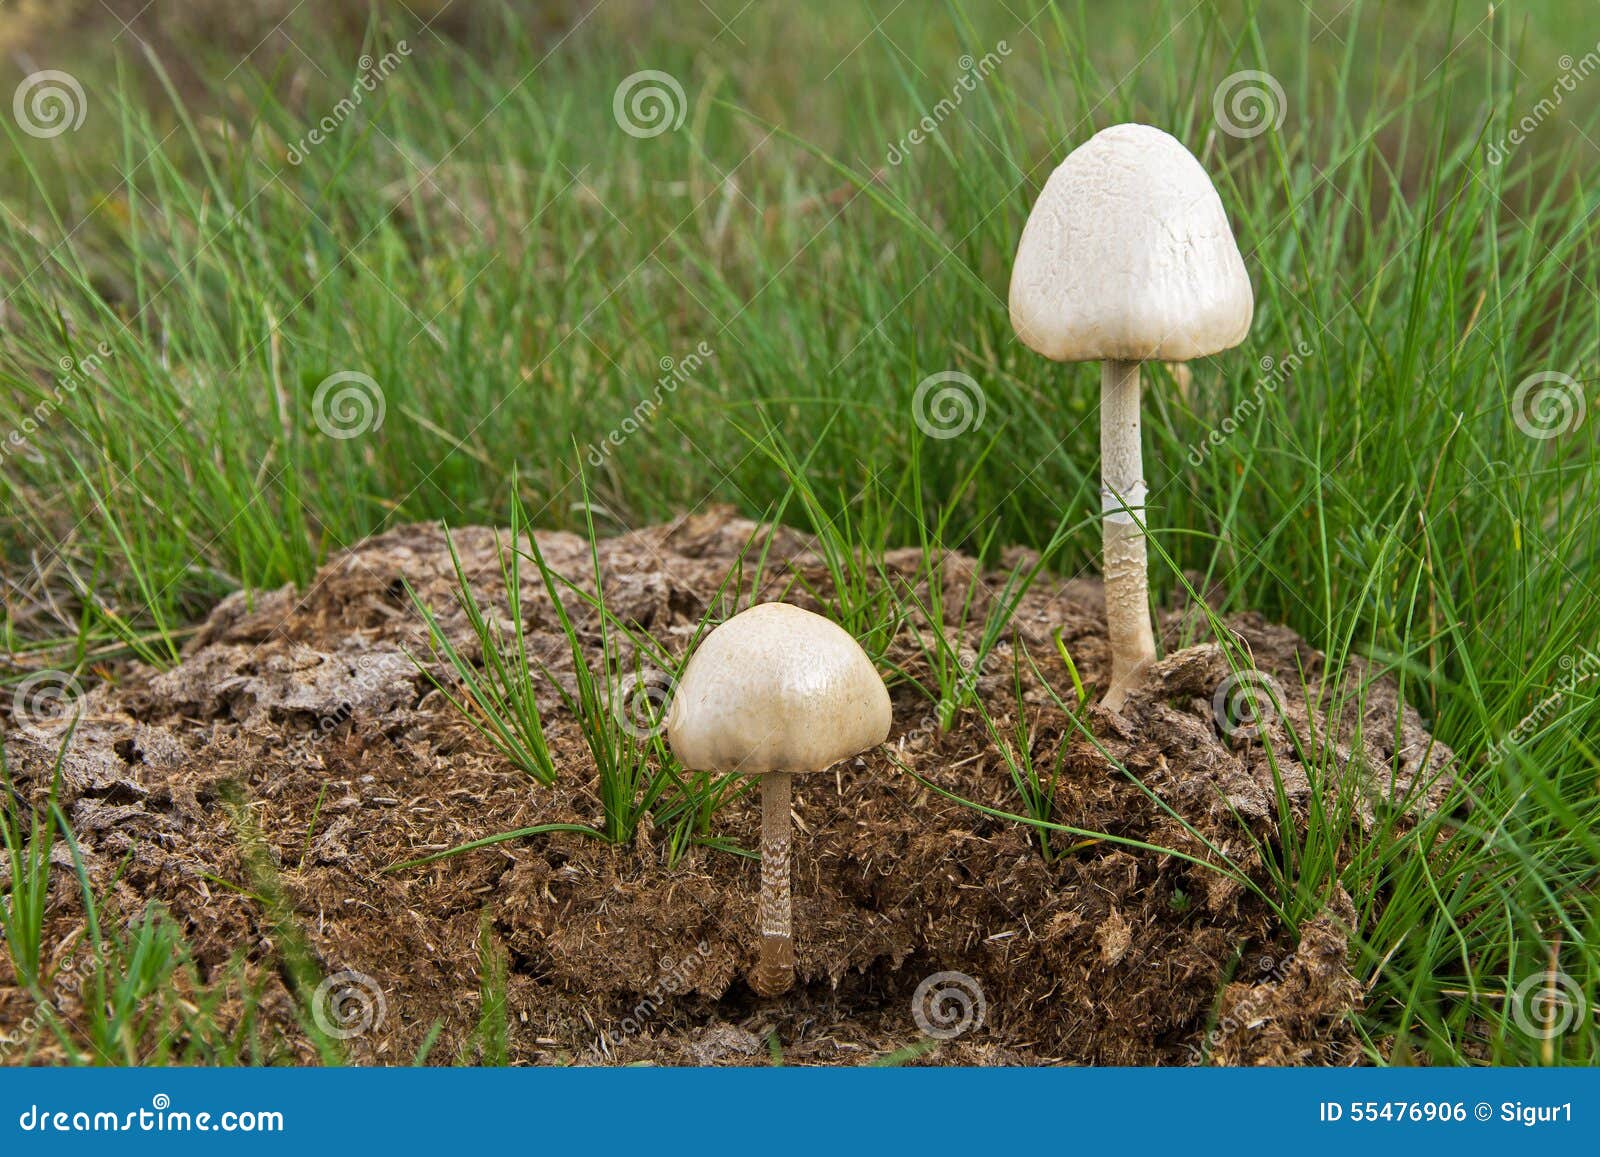 How do you grow mushrooms in cow dung?